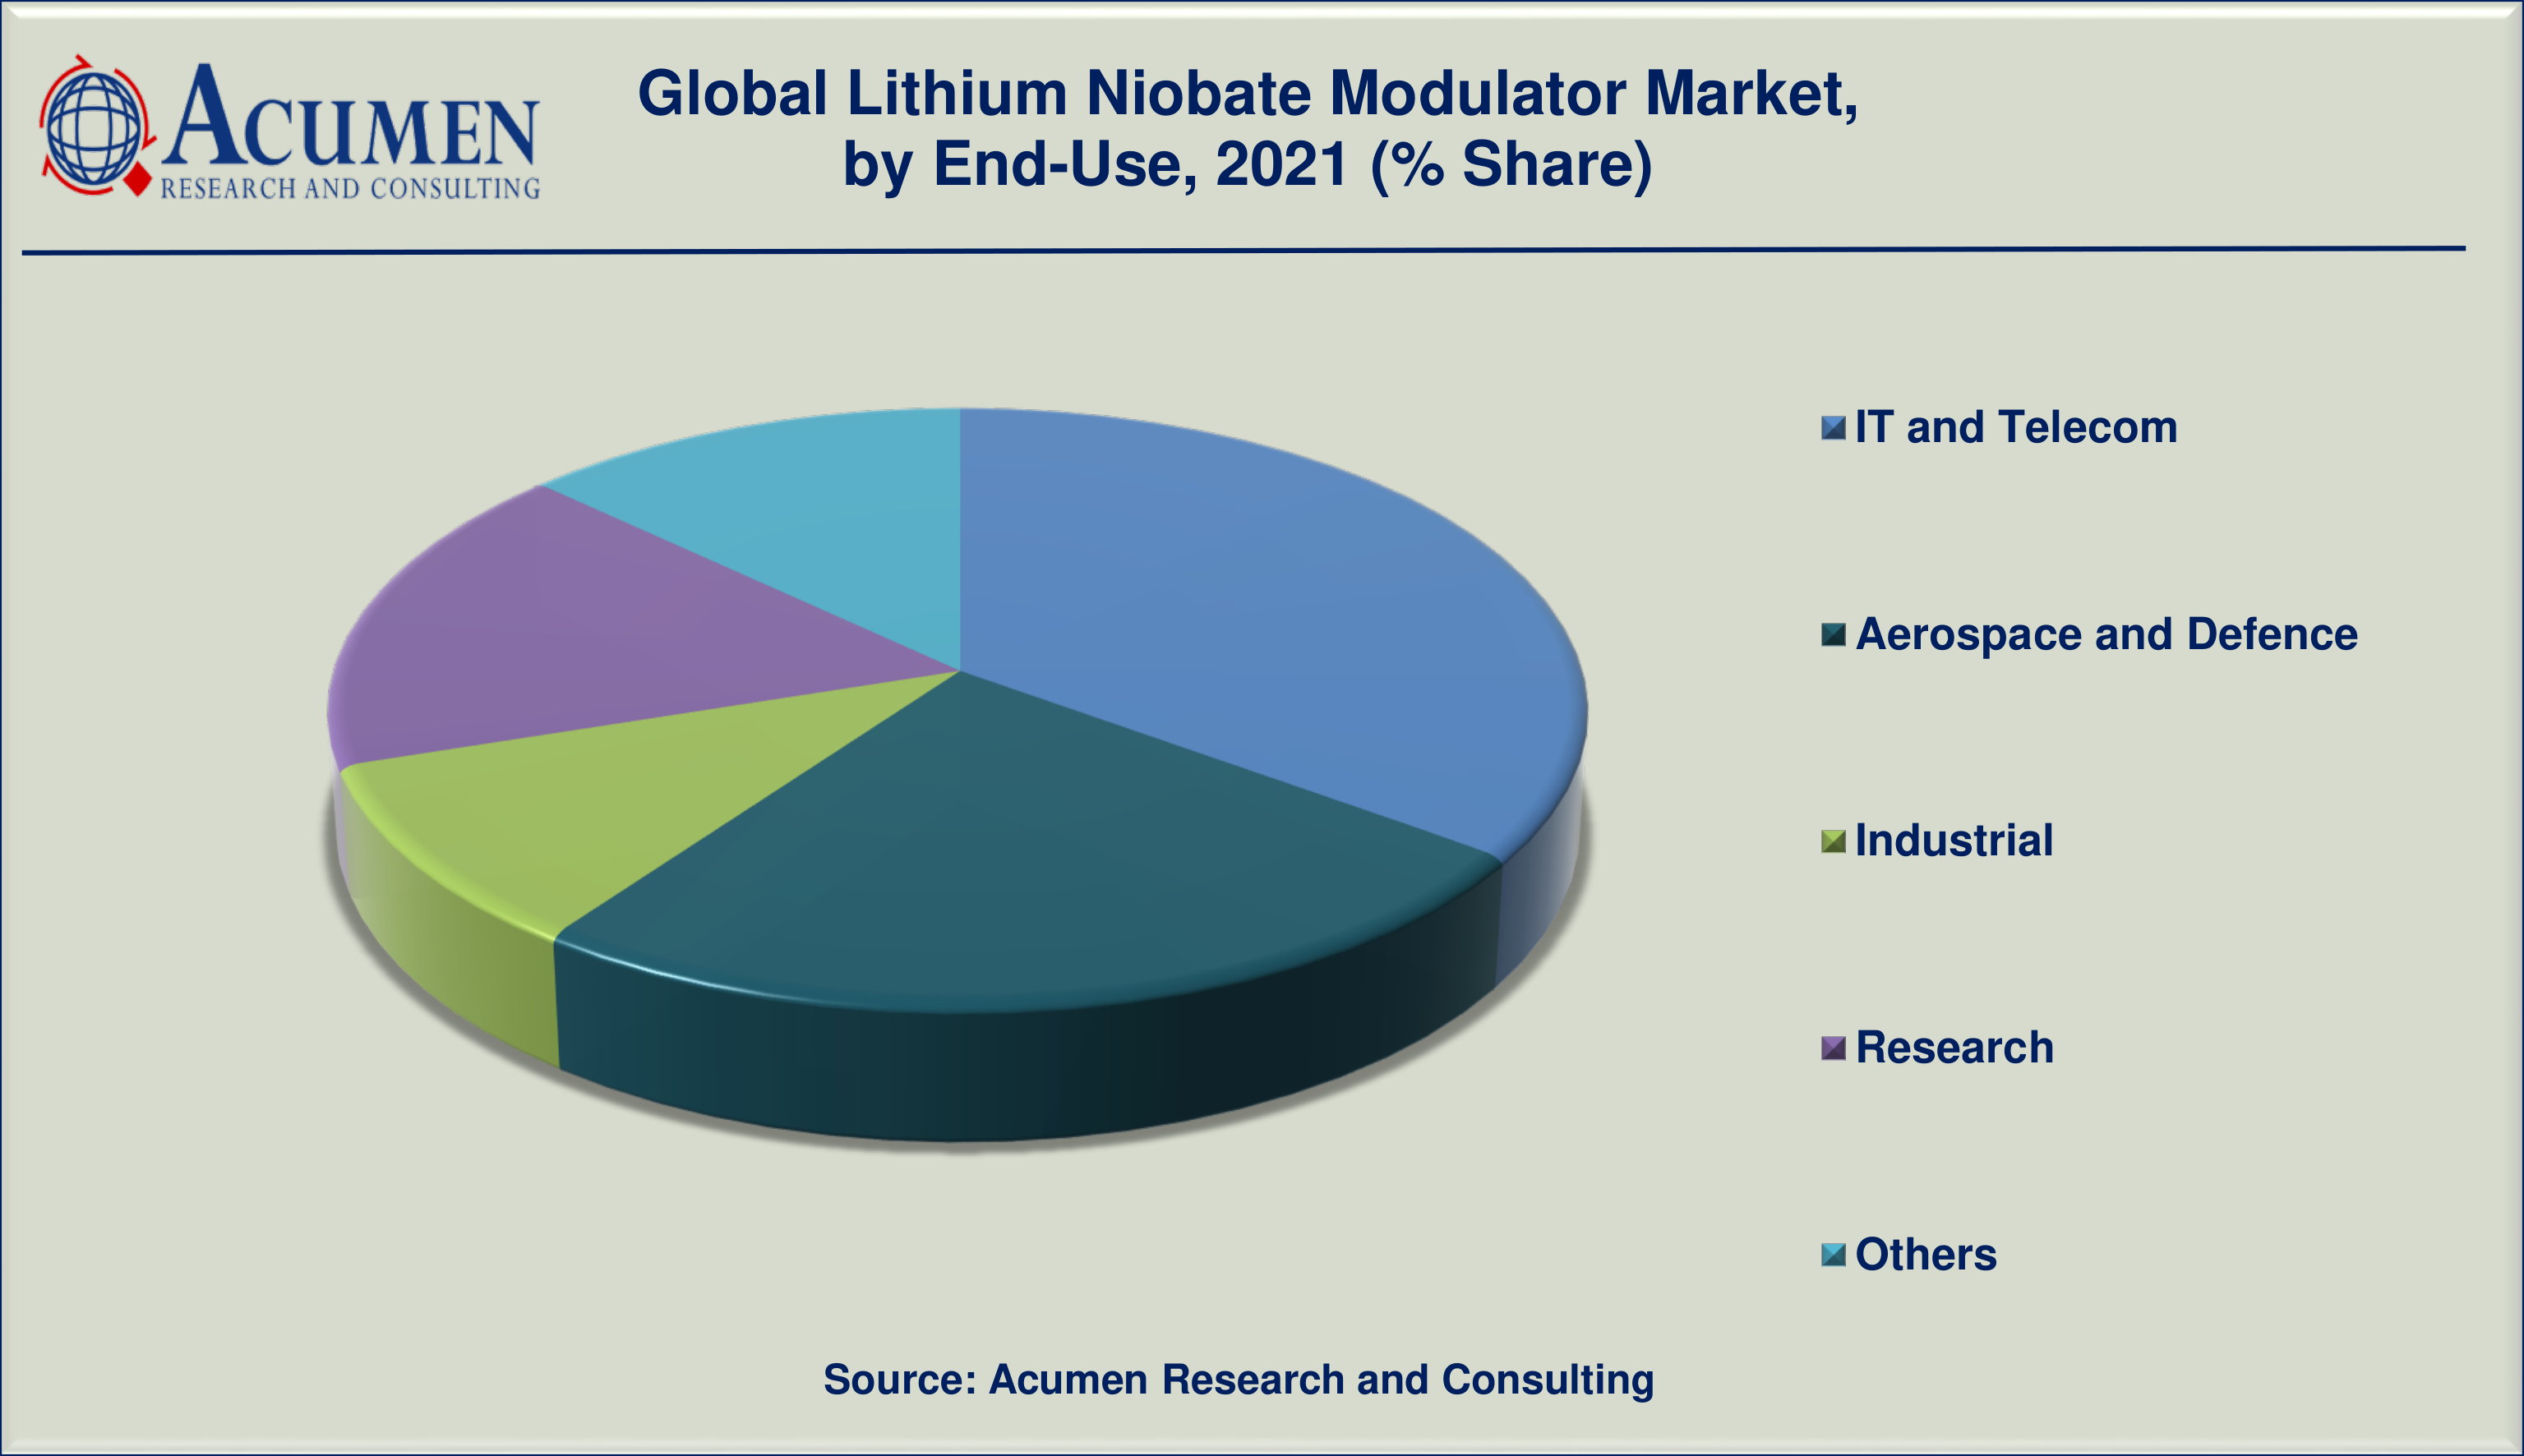 Lithium Niobate Modulator Market by End-Use is projected to achieve a market size of USD 6,943 Million by 2030 budding at a CAGR of 6.8%